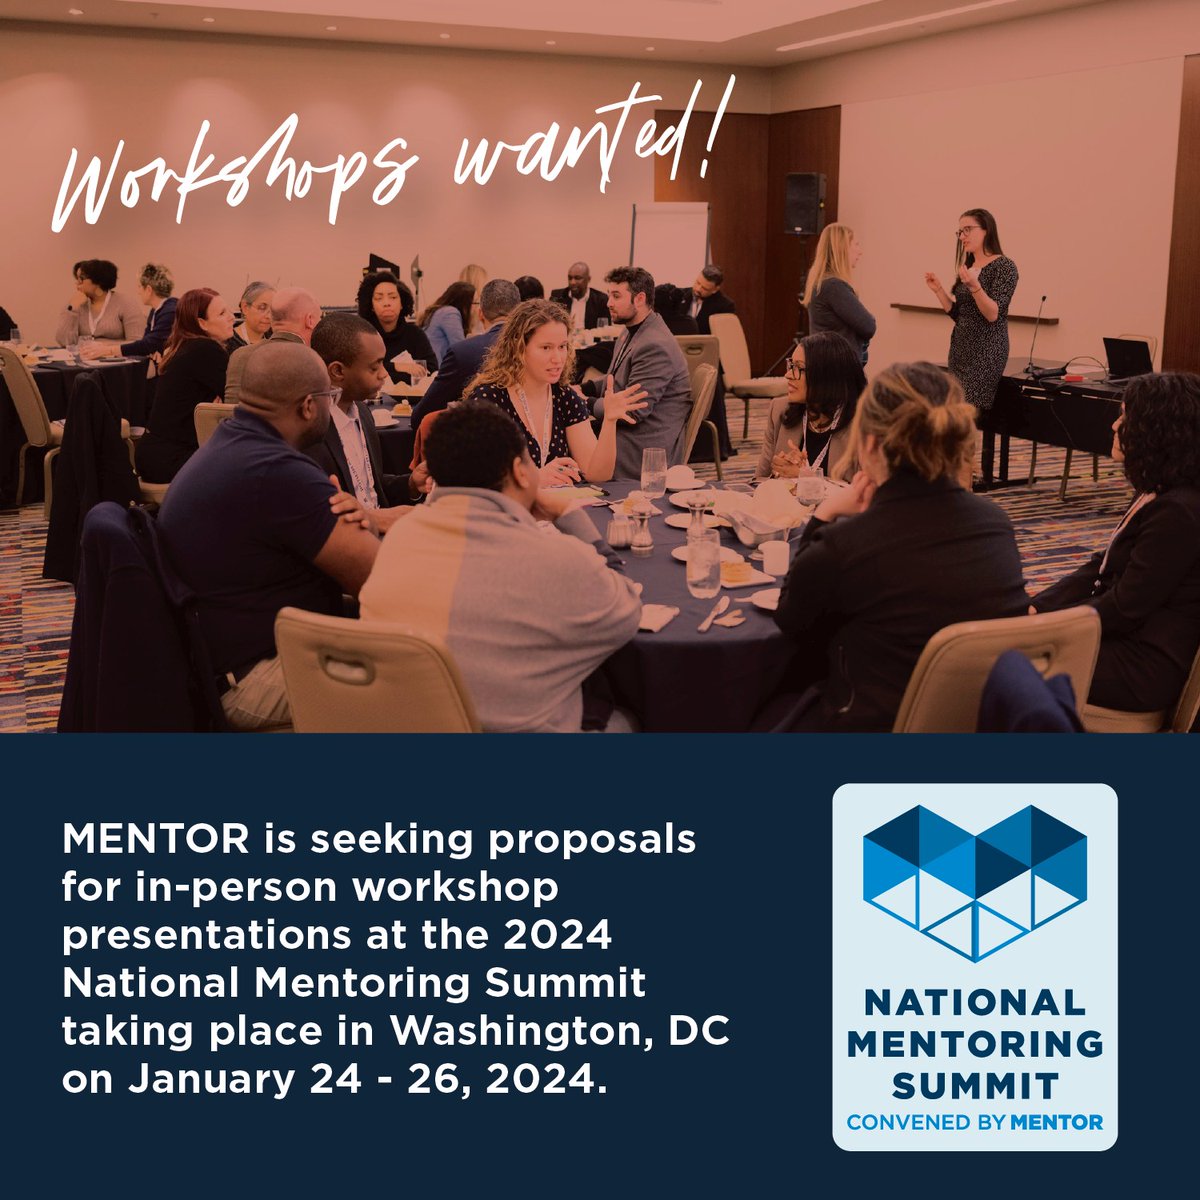 @MENTORnational is accepting workshop proposals for the 2024 National #MentoringSummit! This is a great opportunity to share your passion and expertise & inspire others in the movement. If you're interested, visit mentoring.org/summit-worksho… to learn more. #MentoringAmplifies